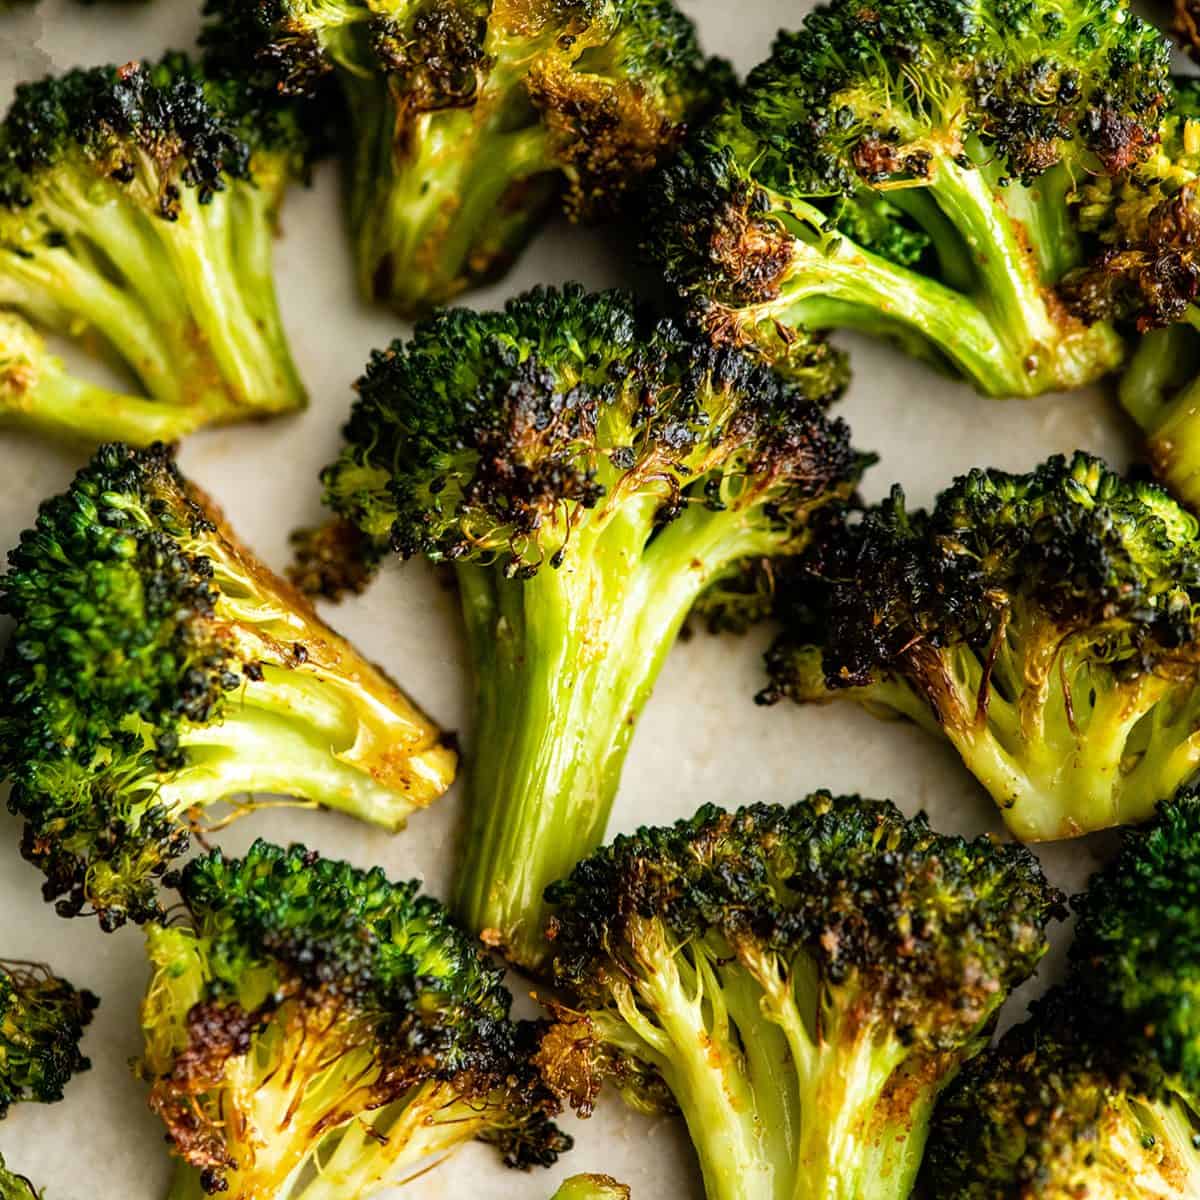 up close photo of 9 pieces of oven roasted broccoli on a plate